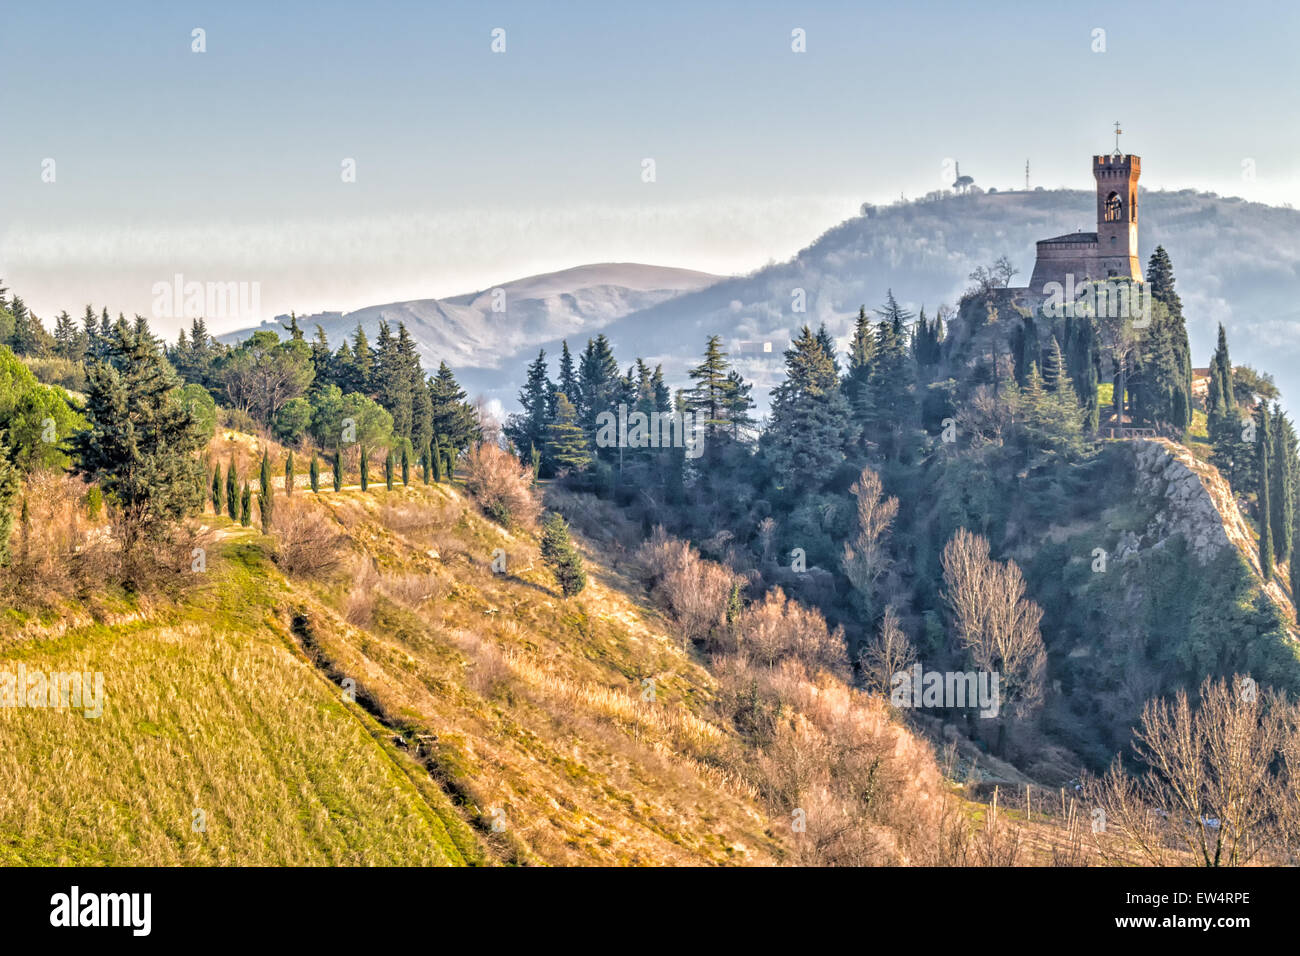 A road with cypresses trees leads to a medieval clock tower on misty hills in a countryside of yellow and reddish bushes and green cypresses in a winter sunny day in Italy Stock Photo